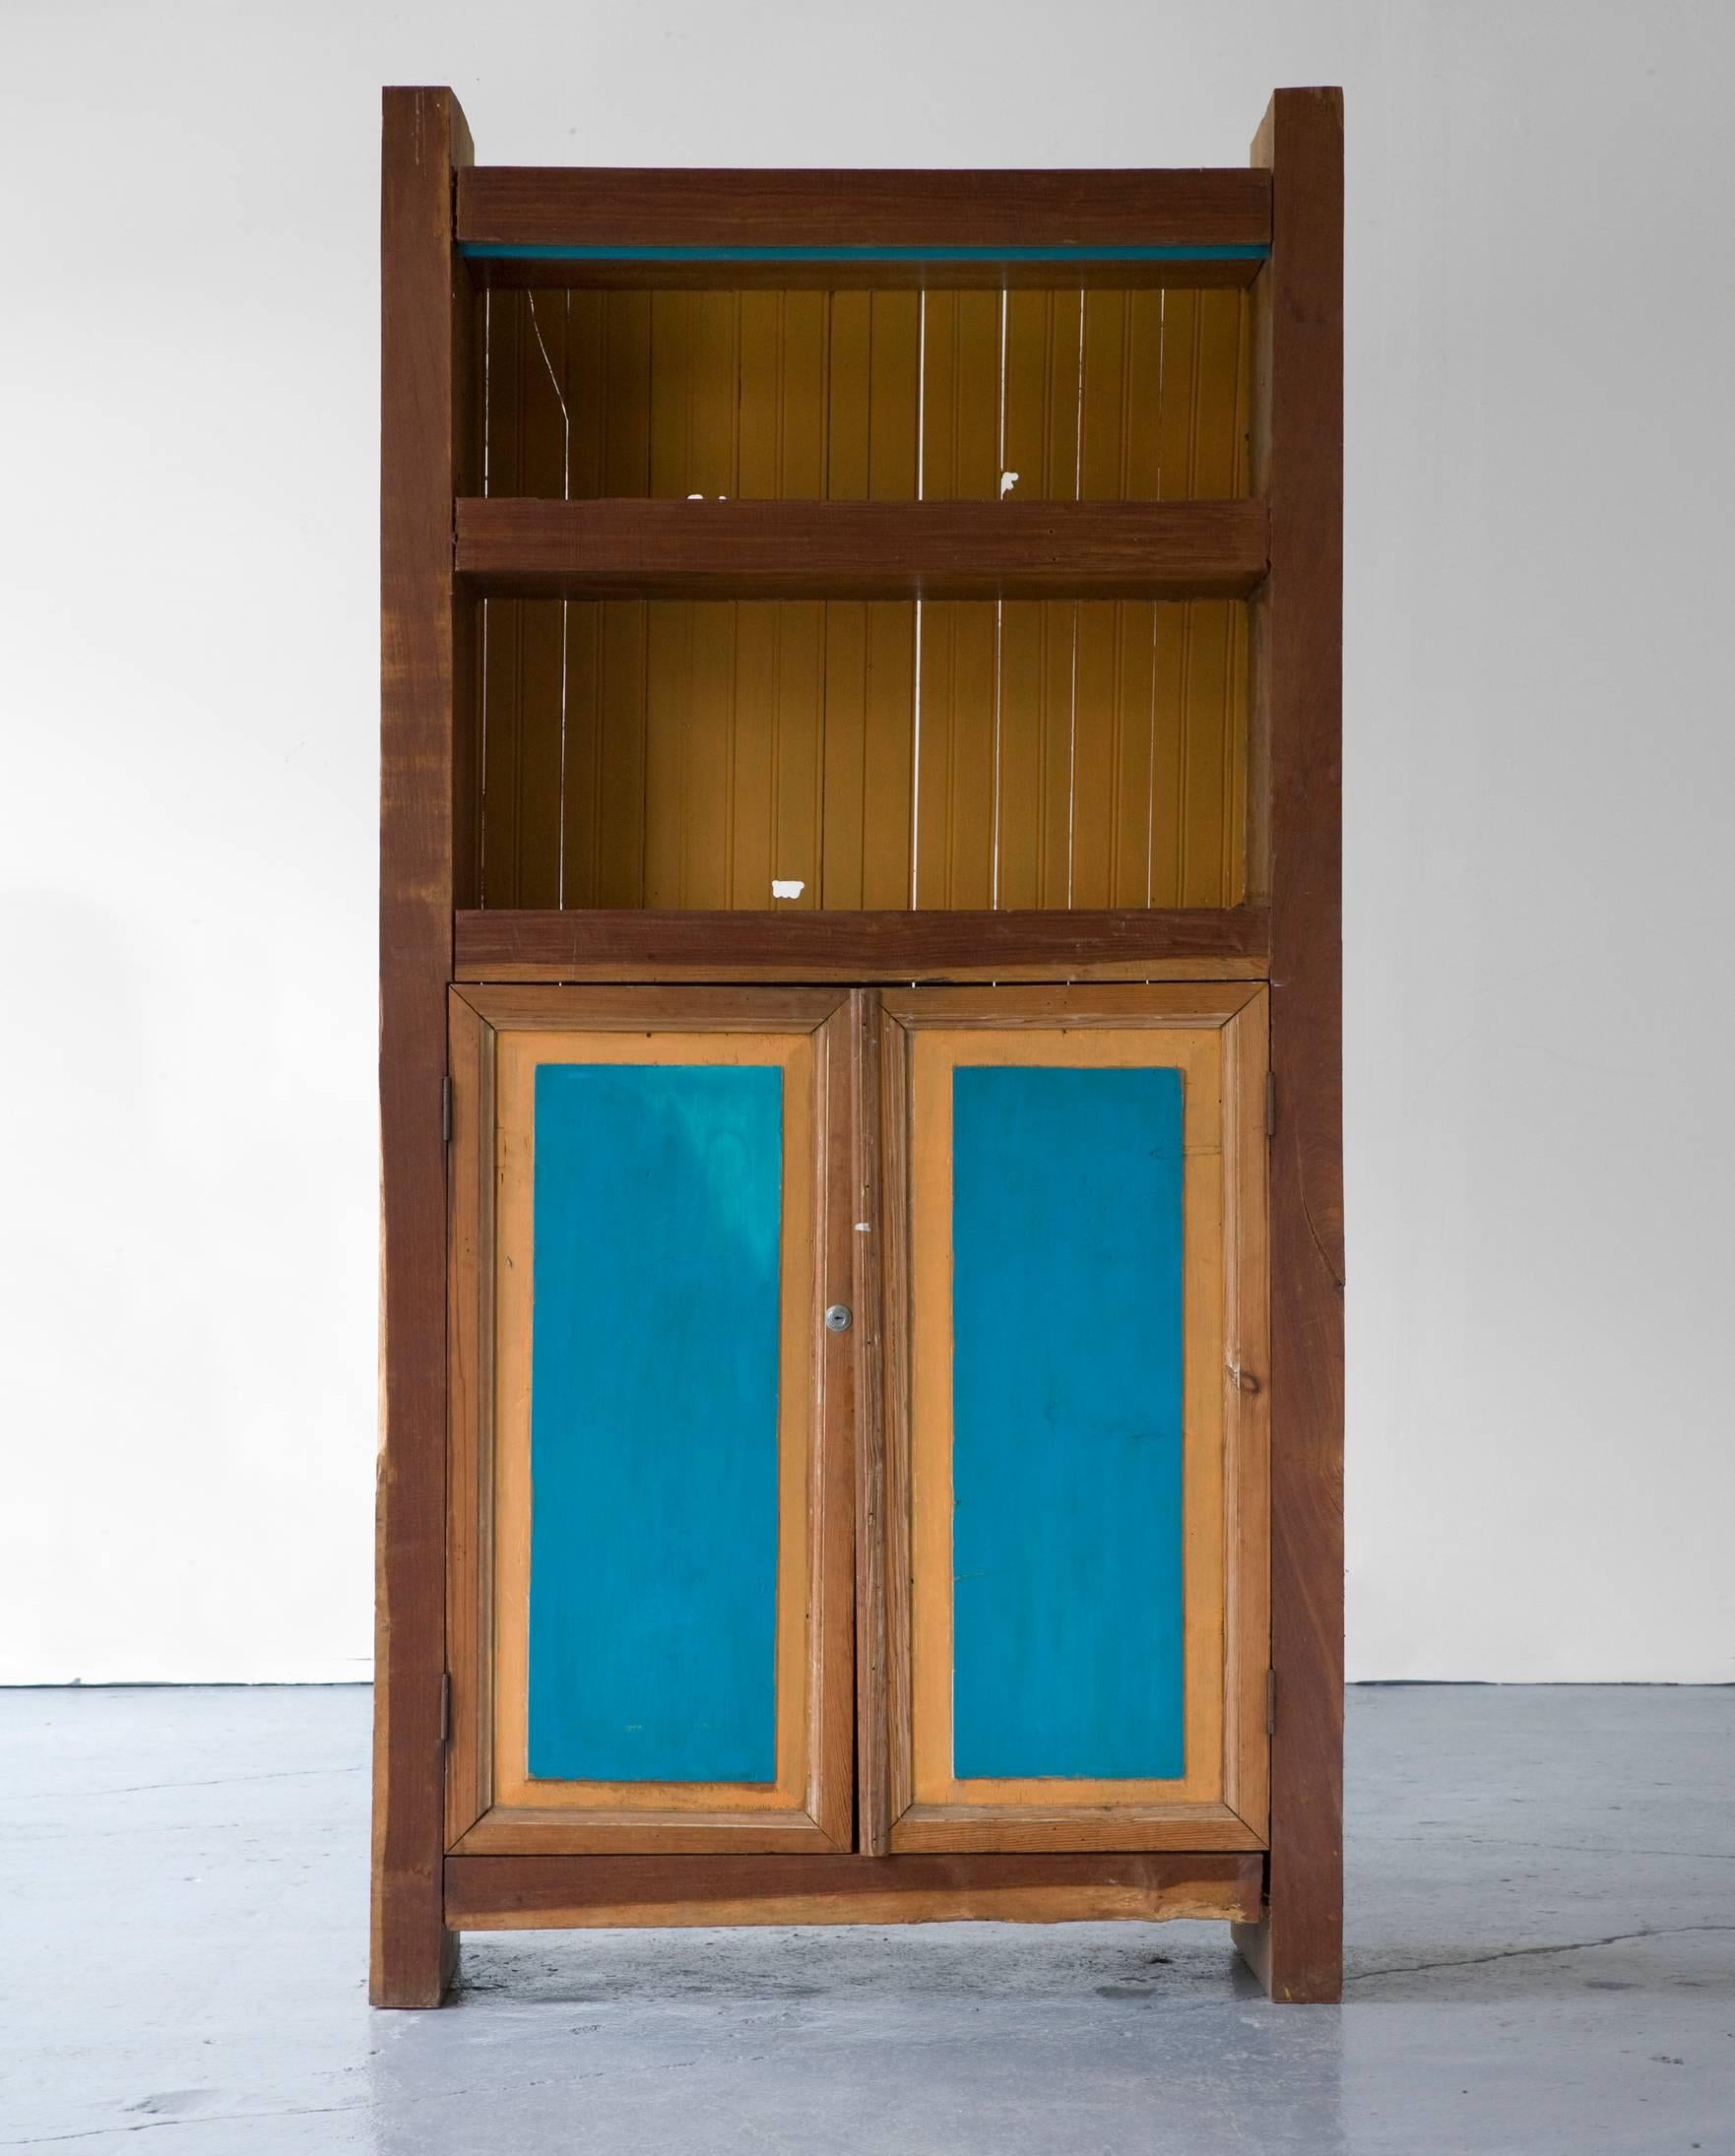 Standing buffet in wood, with painted doors and shelves in yellow and blue. Designed by Jose Zanine for Z Moveis, Denuncia, Brazil, circa 1970.